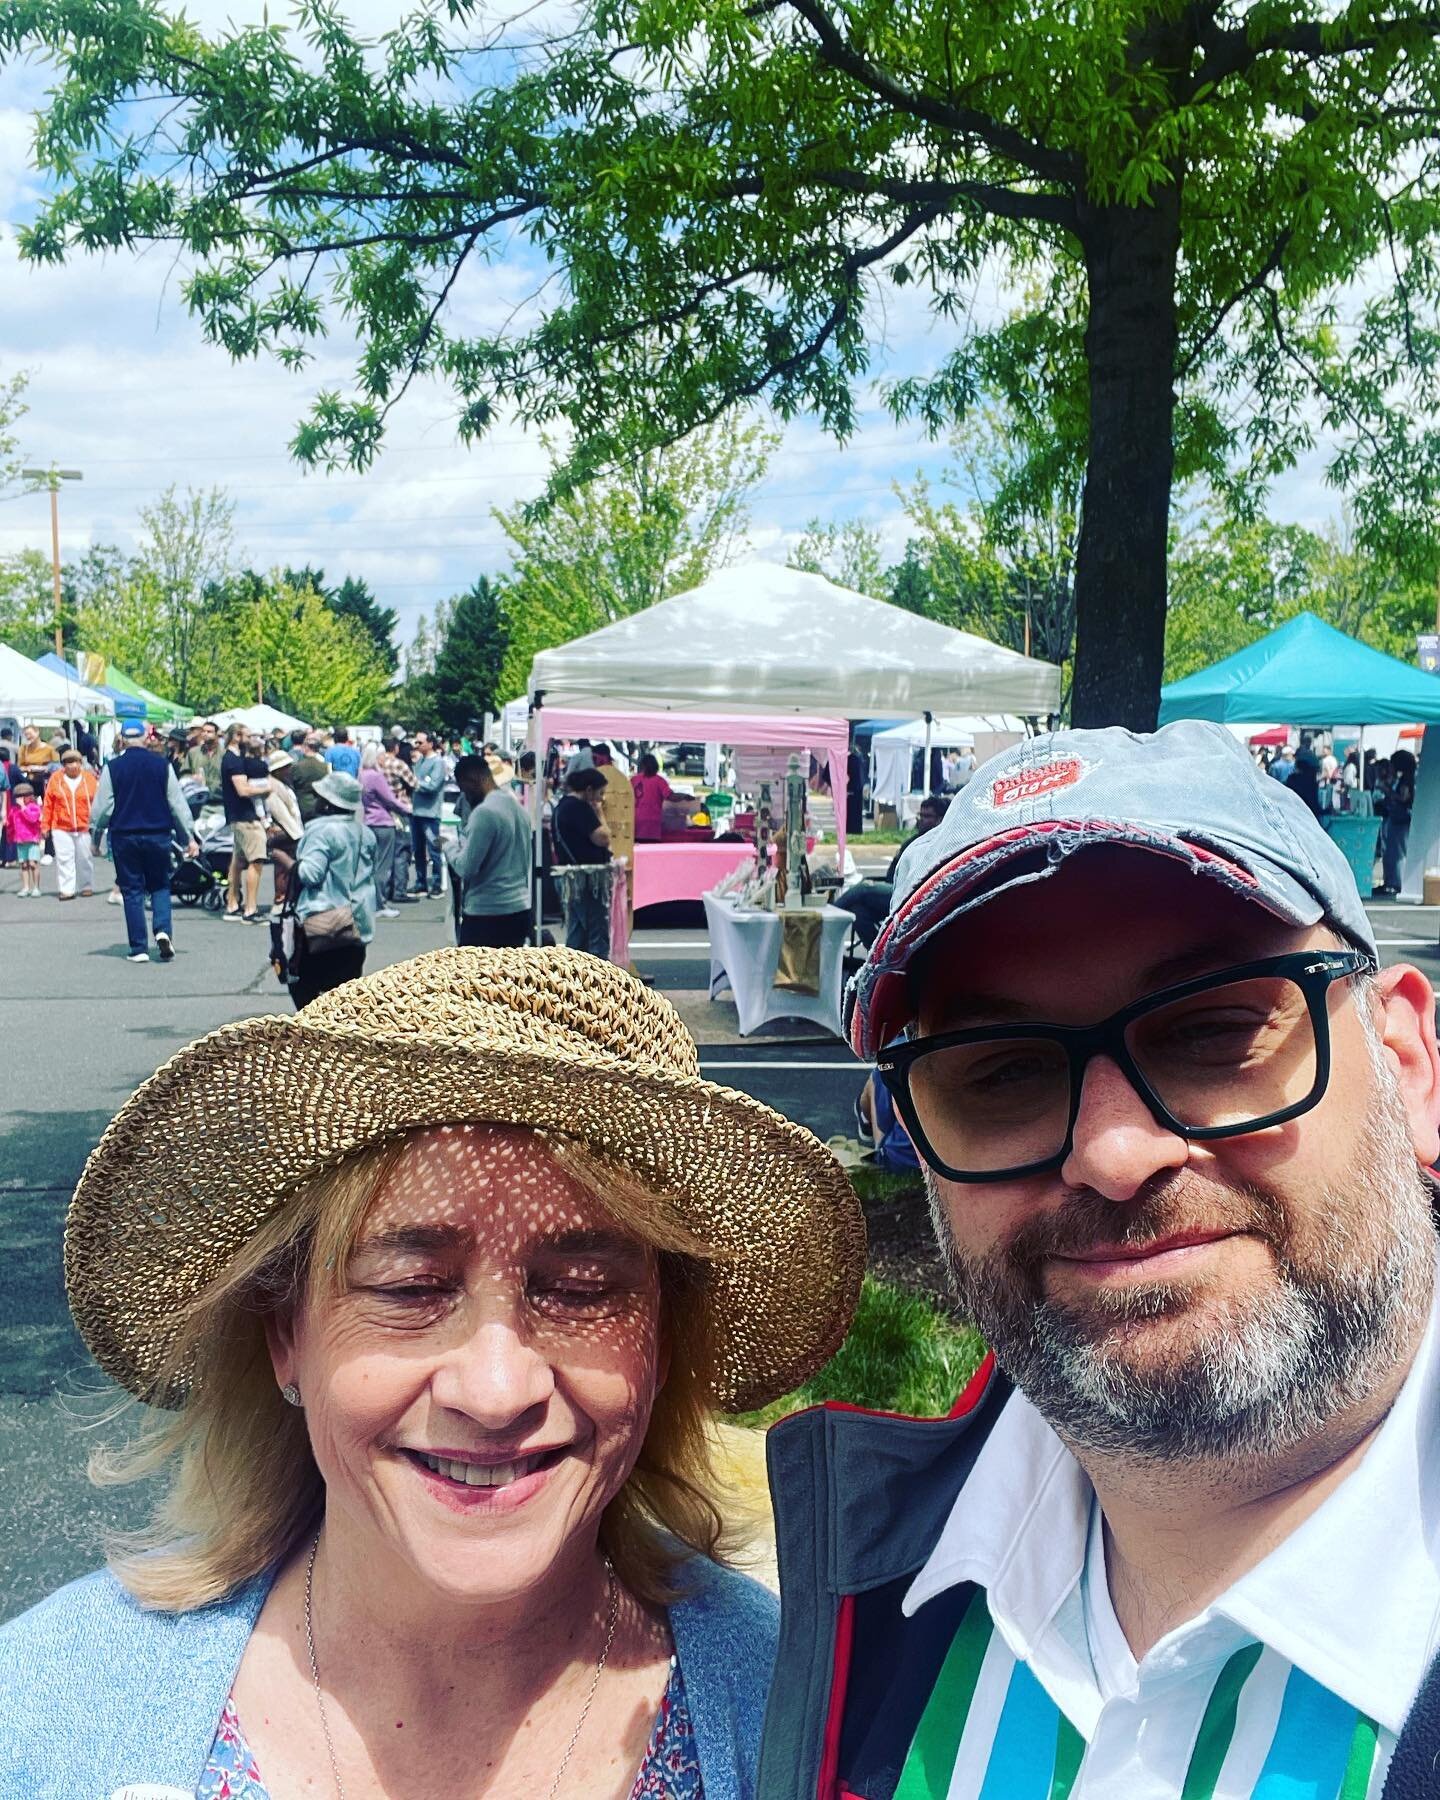 @fairfaxvegfest with @olemherndon.  Great afternoon with yummy food, education, skins are and so much more.  Plant-based is exciting and healthy